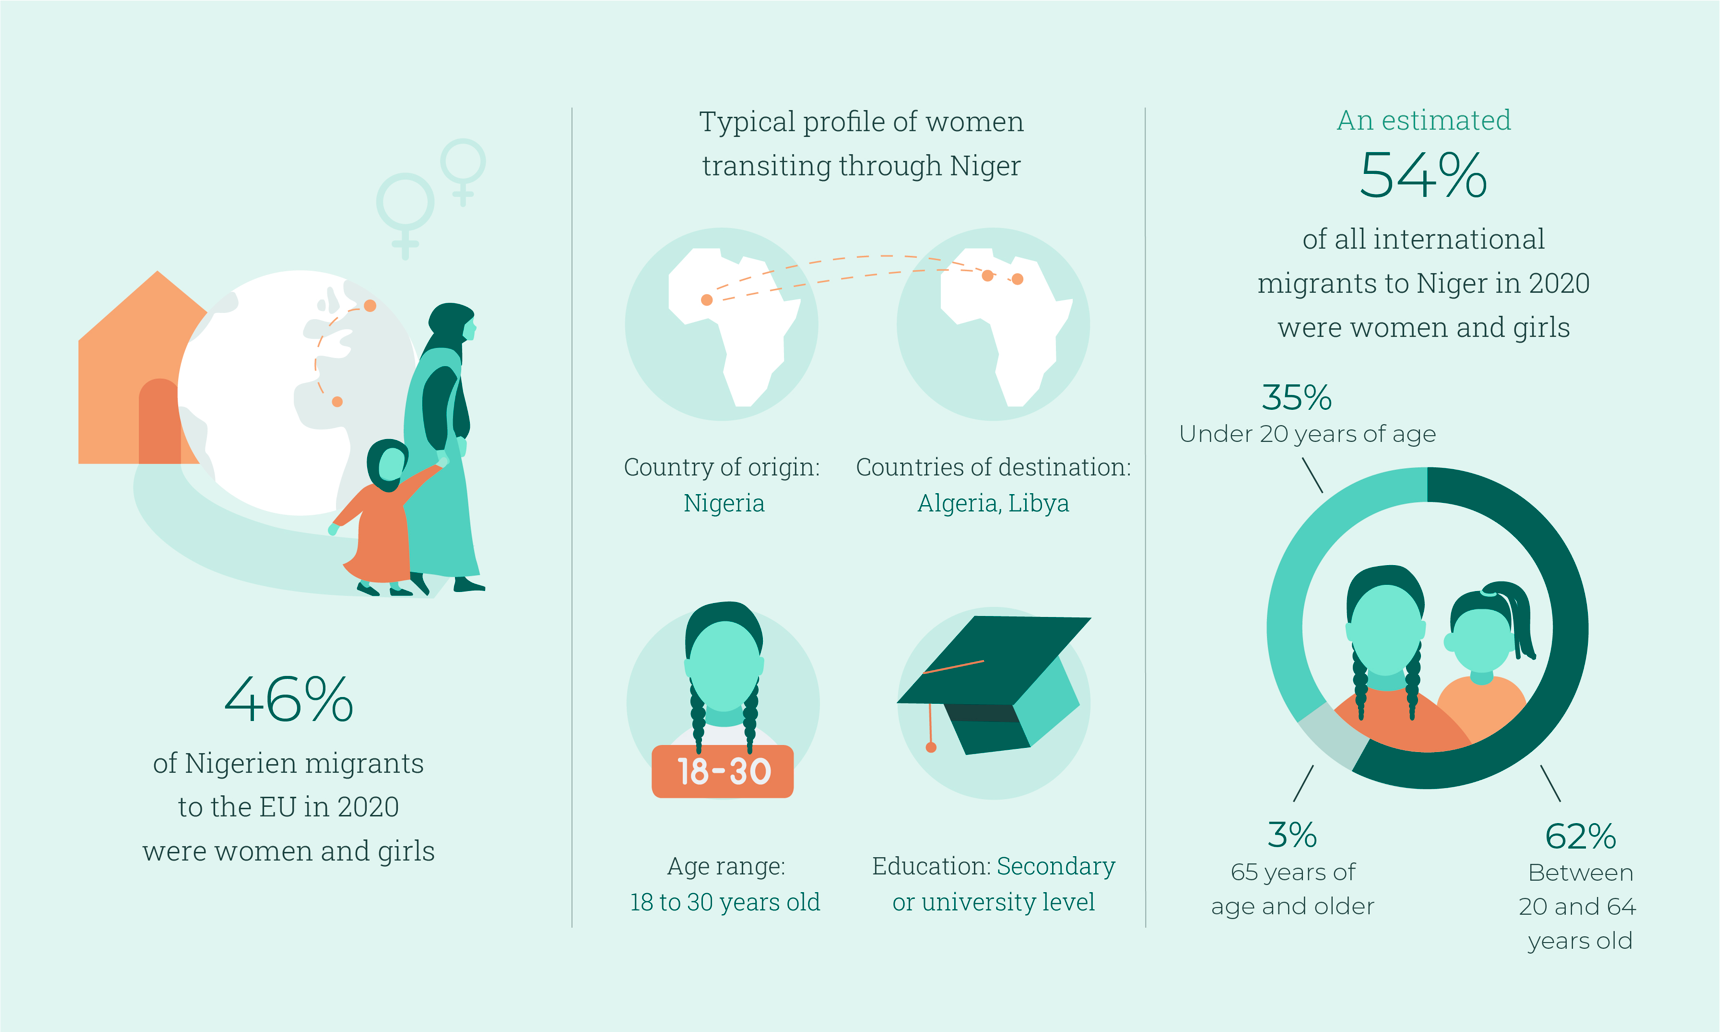 Women’s migration from, into and through Niger